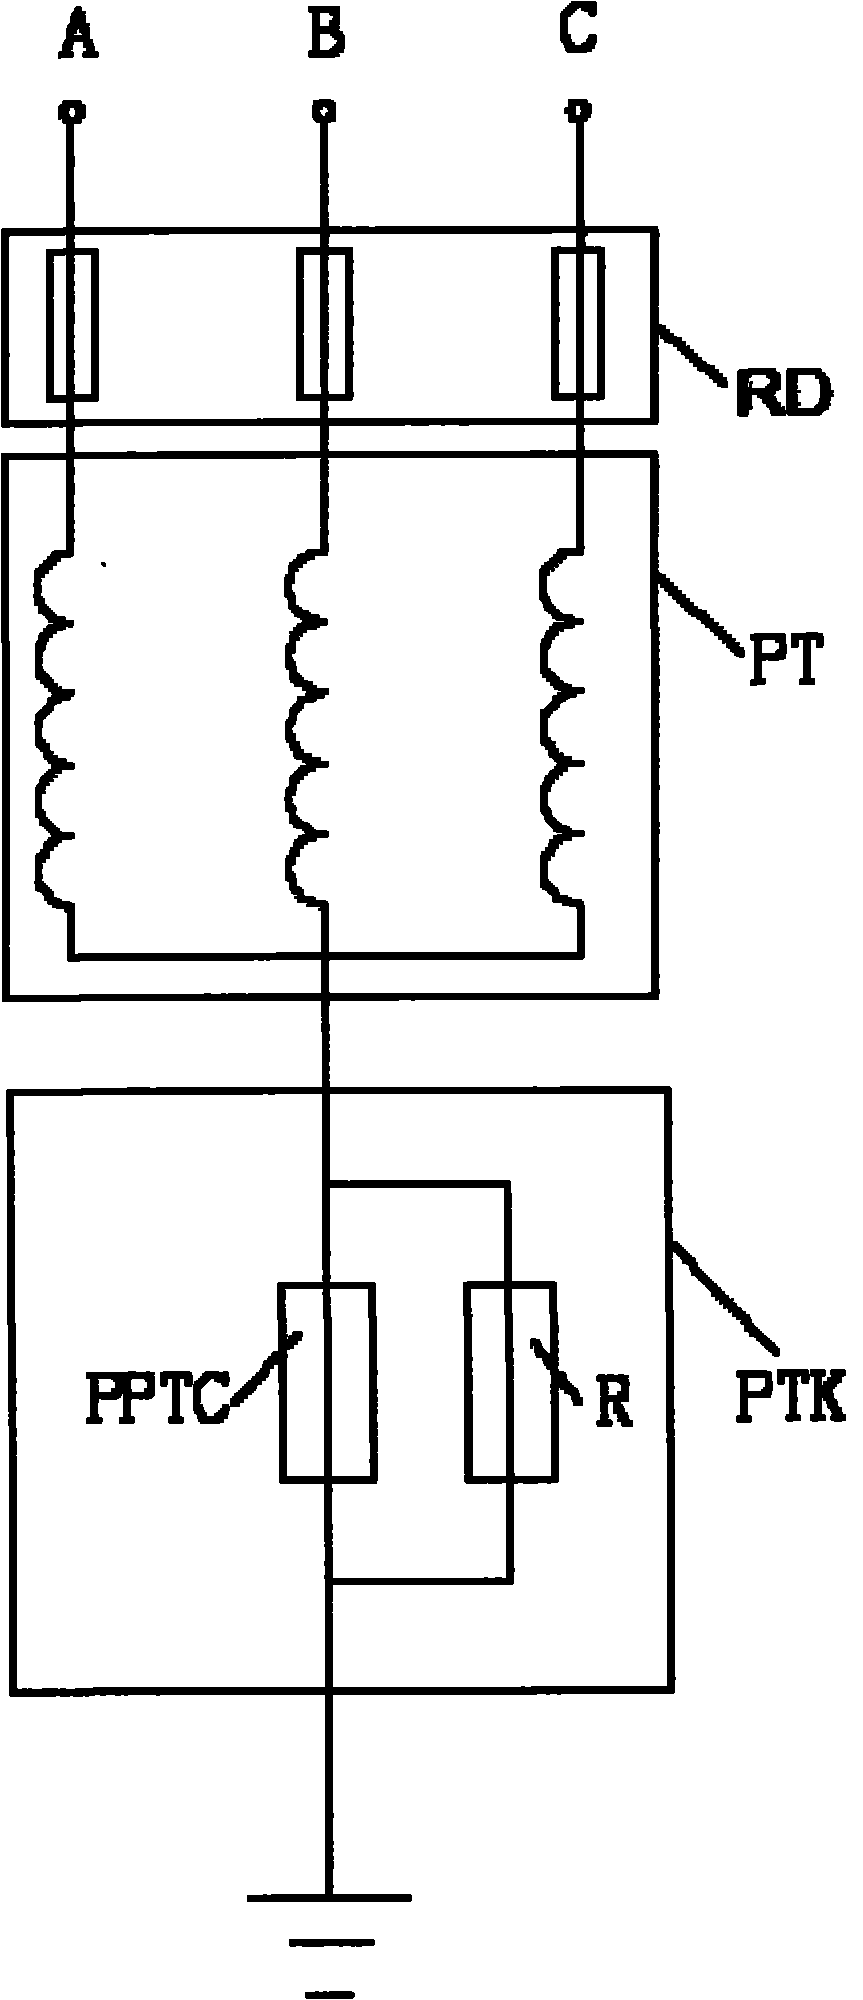 Harmonic elimination protector for electromagnetic potential transformer (PT) of three-phase electric network